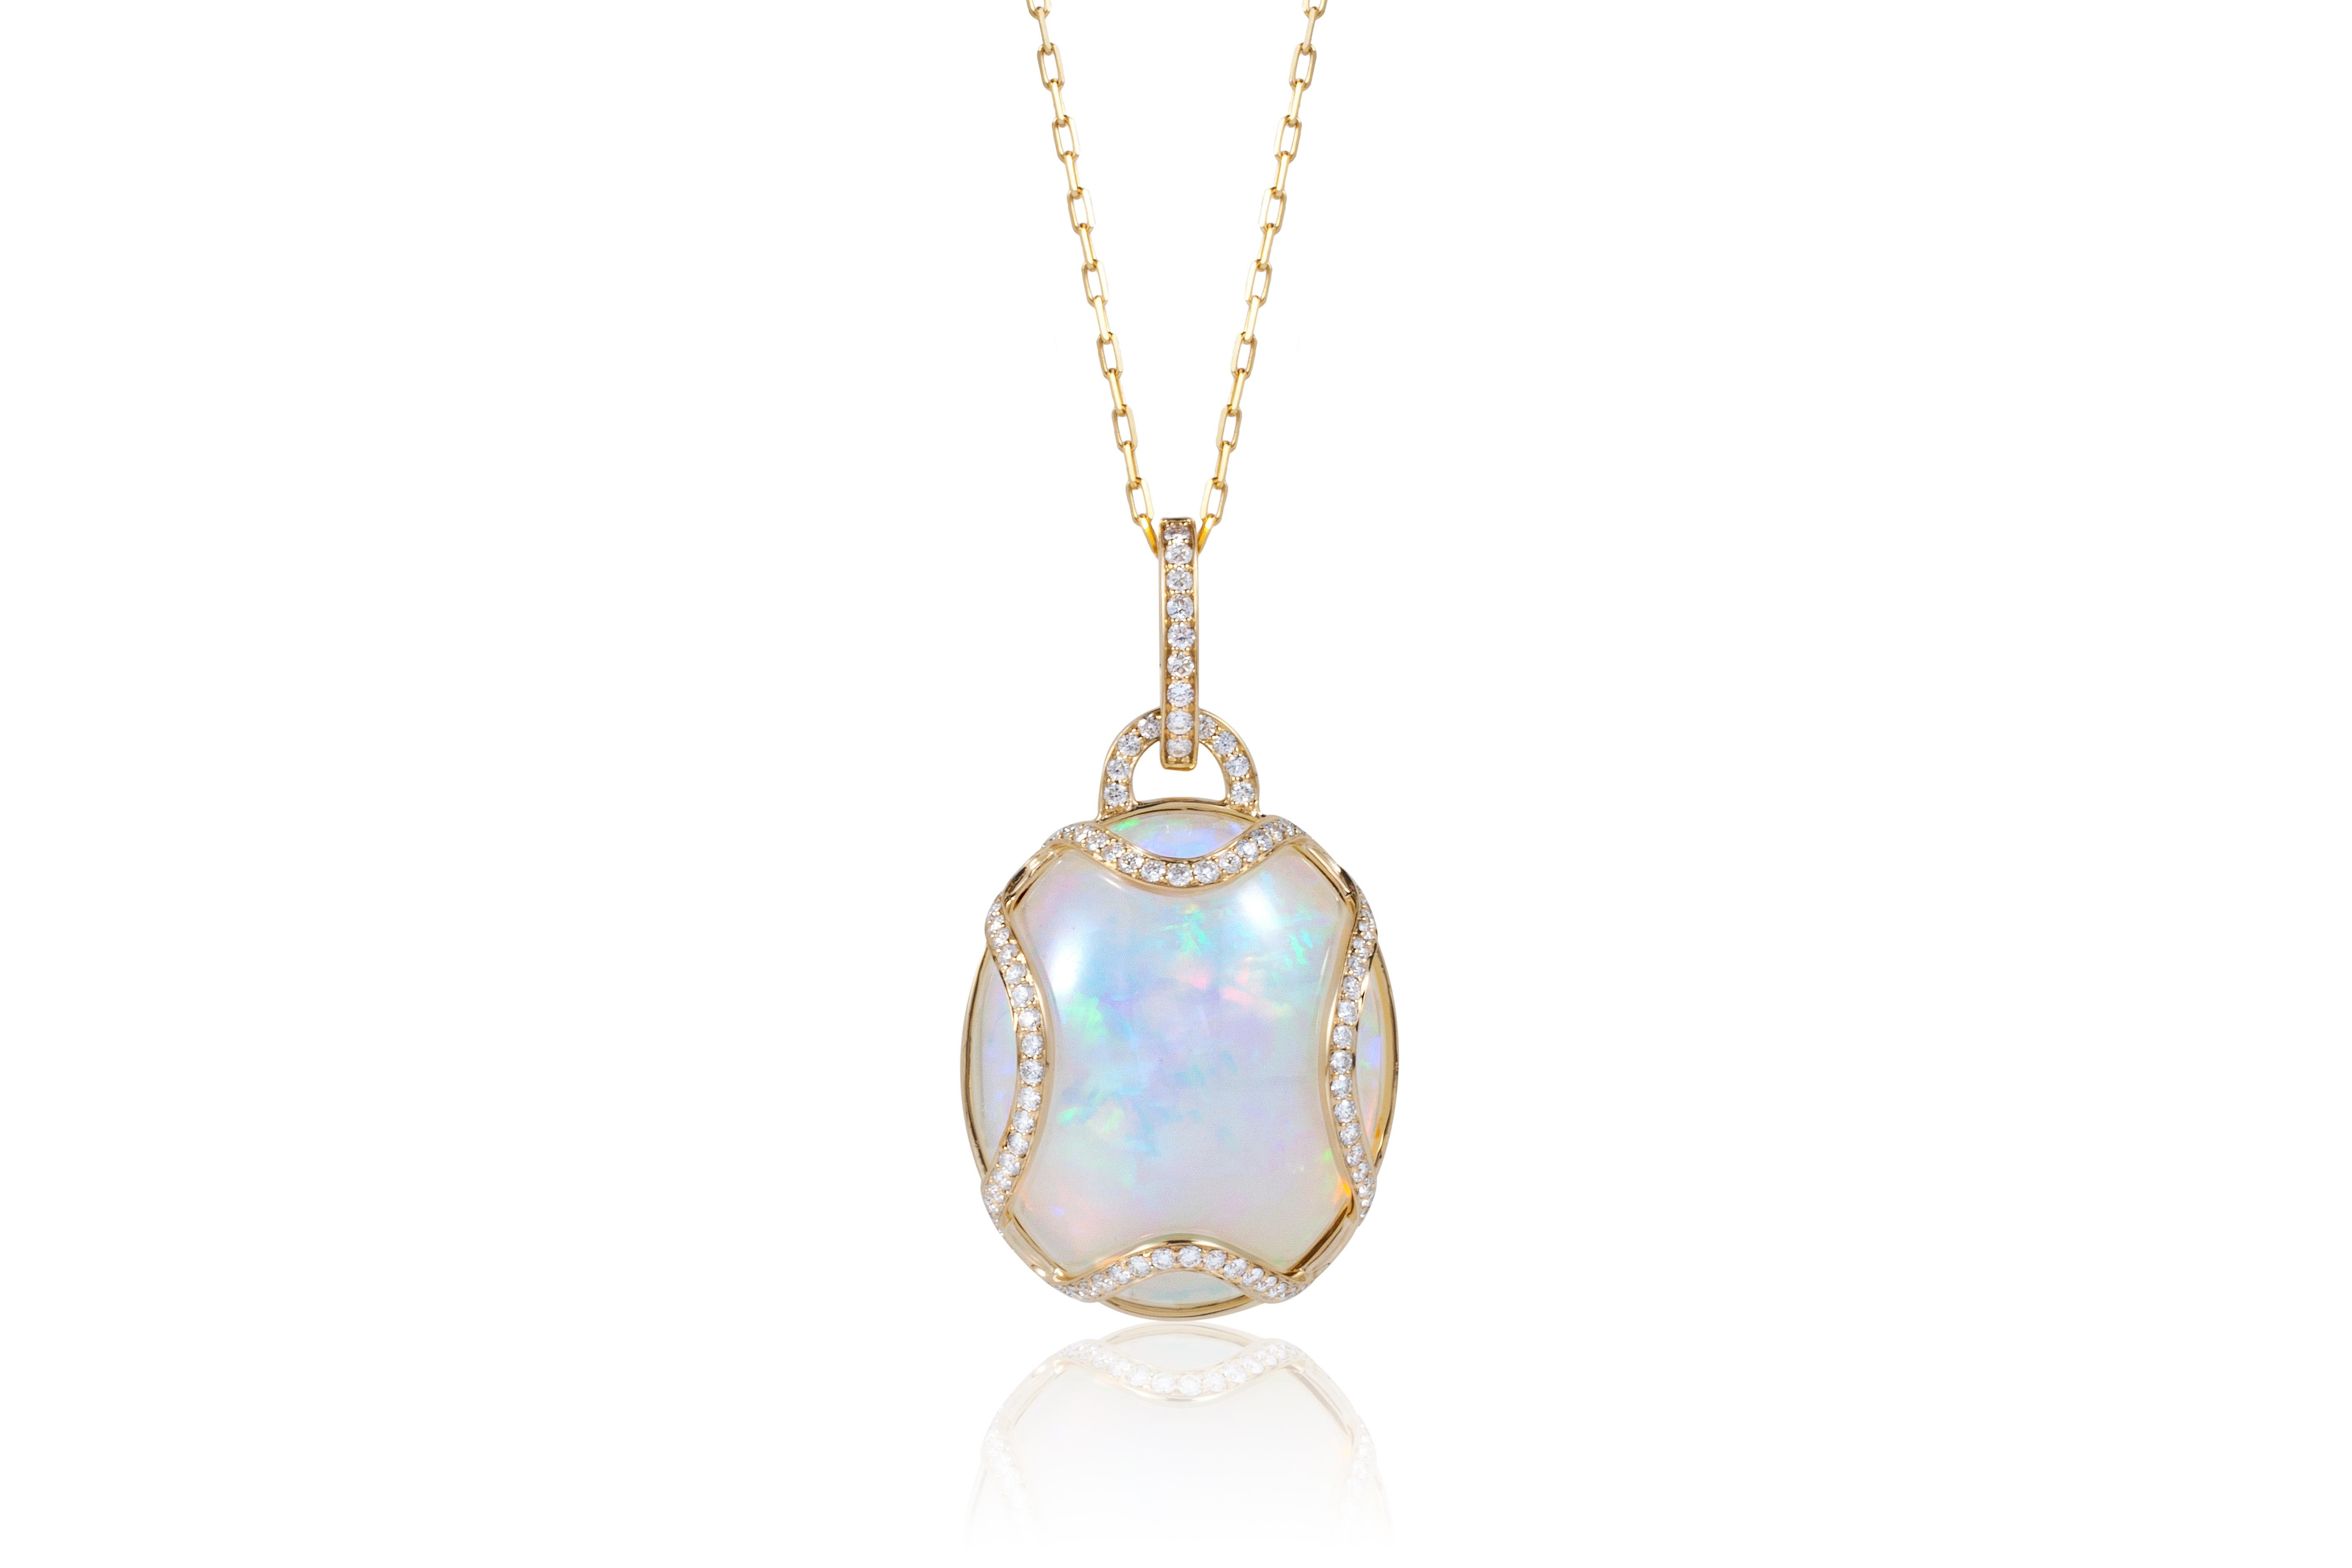 Large Reddish Opal Pendant with Diamonds n 18K Yellow Gold, from 'G-One' Collection

Gemstone Weight: Opal- 27.29 Carats

Diamond: G-H / VS, Approx Wt: 0.72 Carats